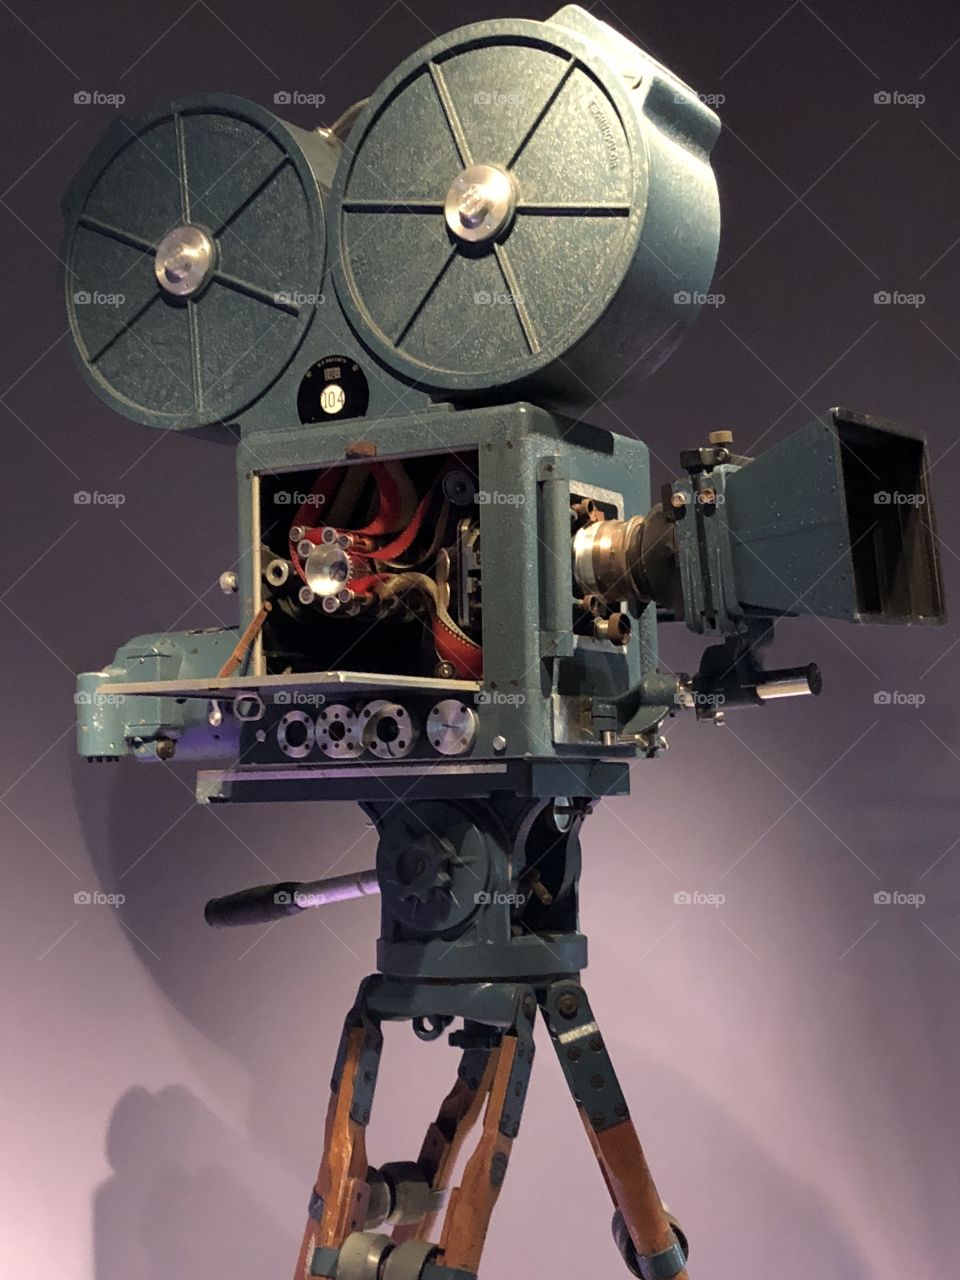 HBO old video camera 